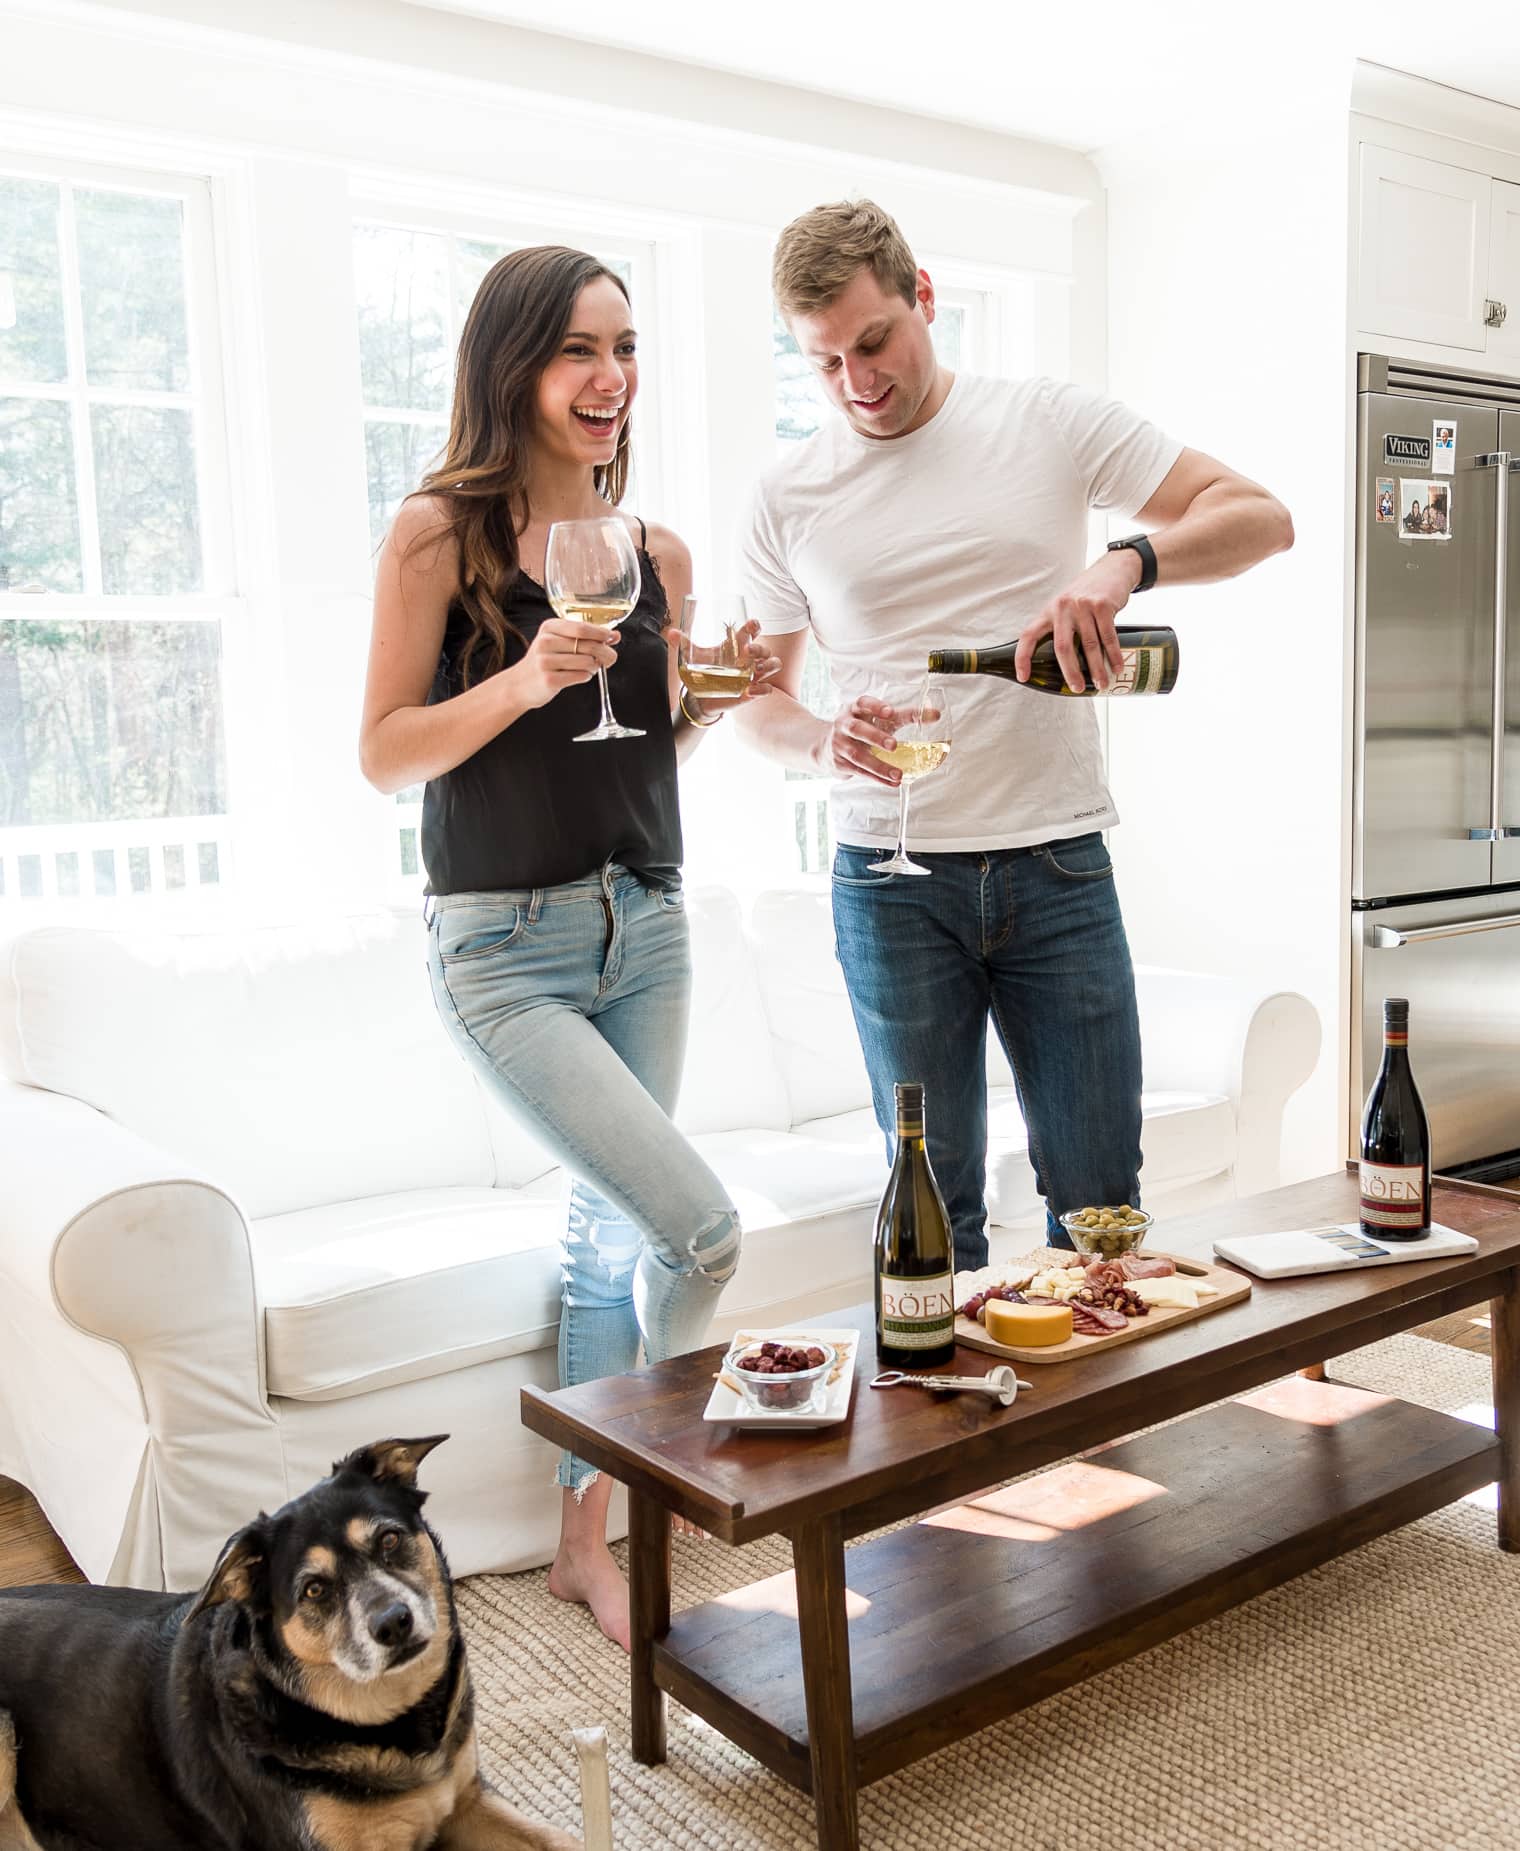 7 Tips To Host a Memorable In Home Wine Tasting Party | Wine Party Ideas